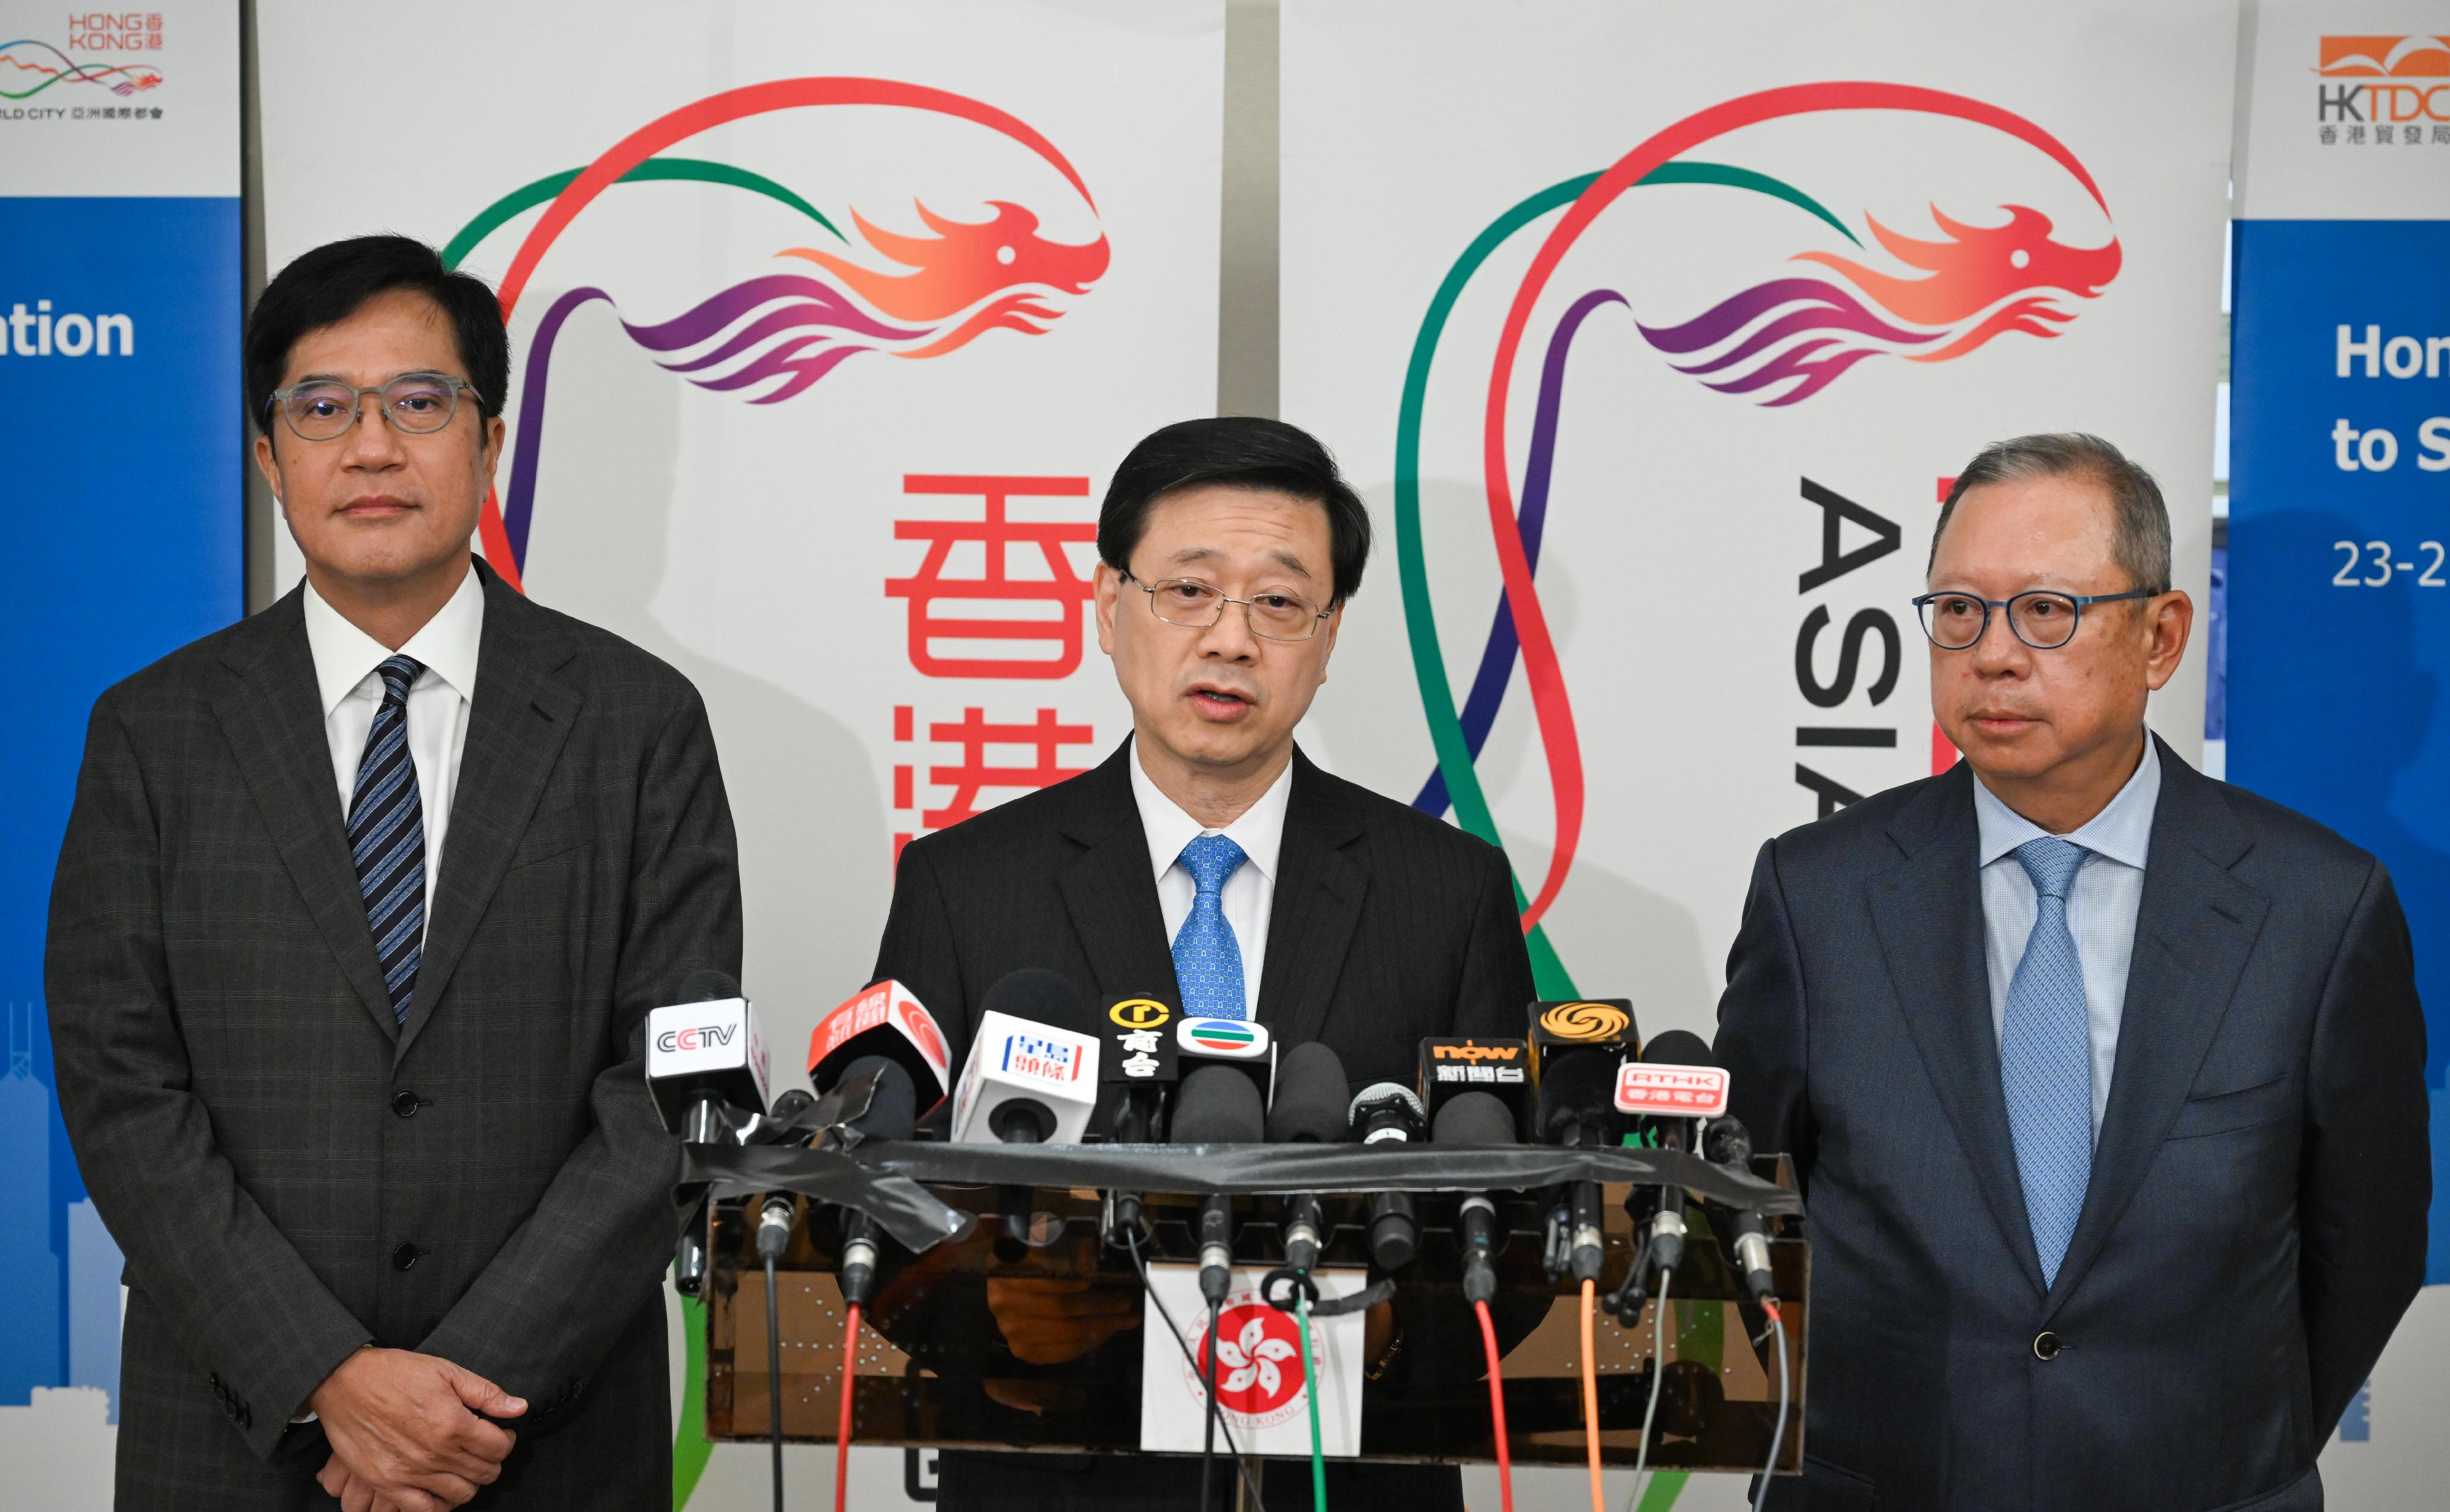 The Chief Executive, Mr John Lee (centre), together with the Deputy Financial Secretary, Mr Michael Wong (left), and the Chairman of the Hong Kong Trade Development Council, Dr Peter Lam (right), meet the media in Singapore today (July 24).